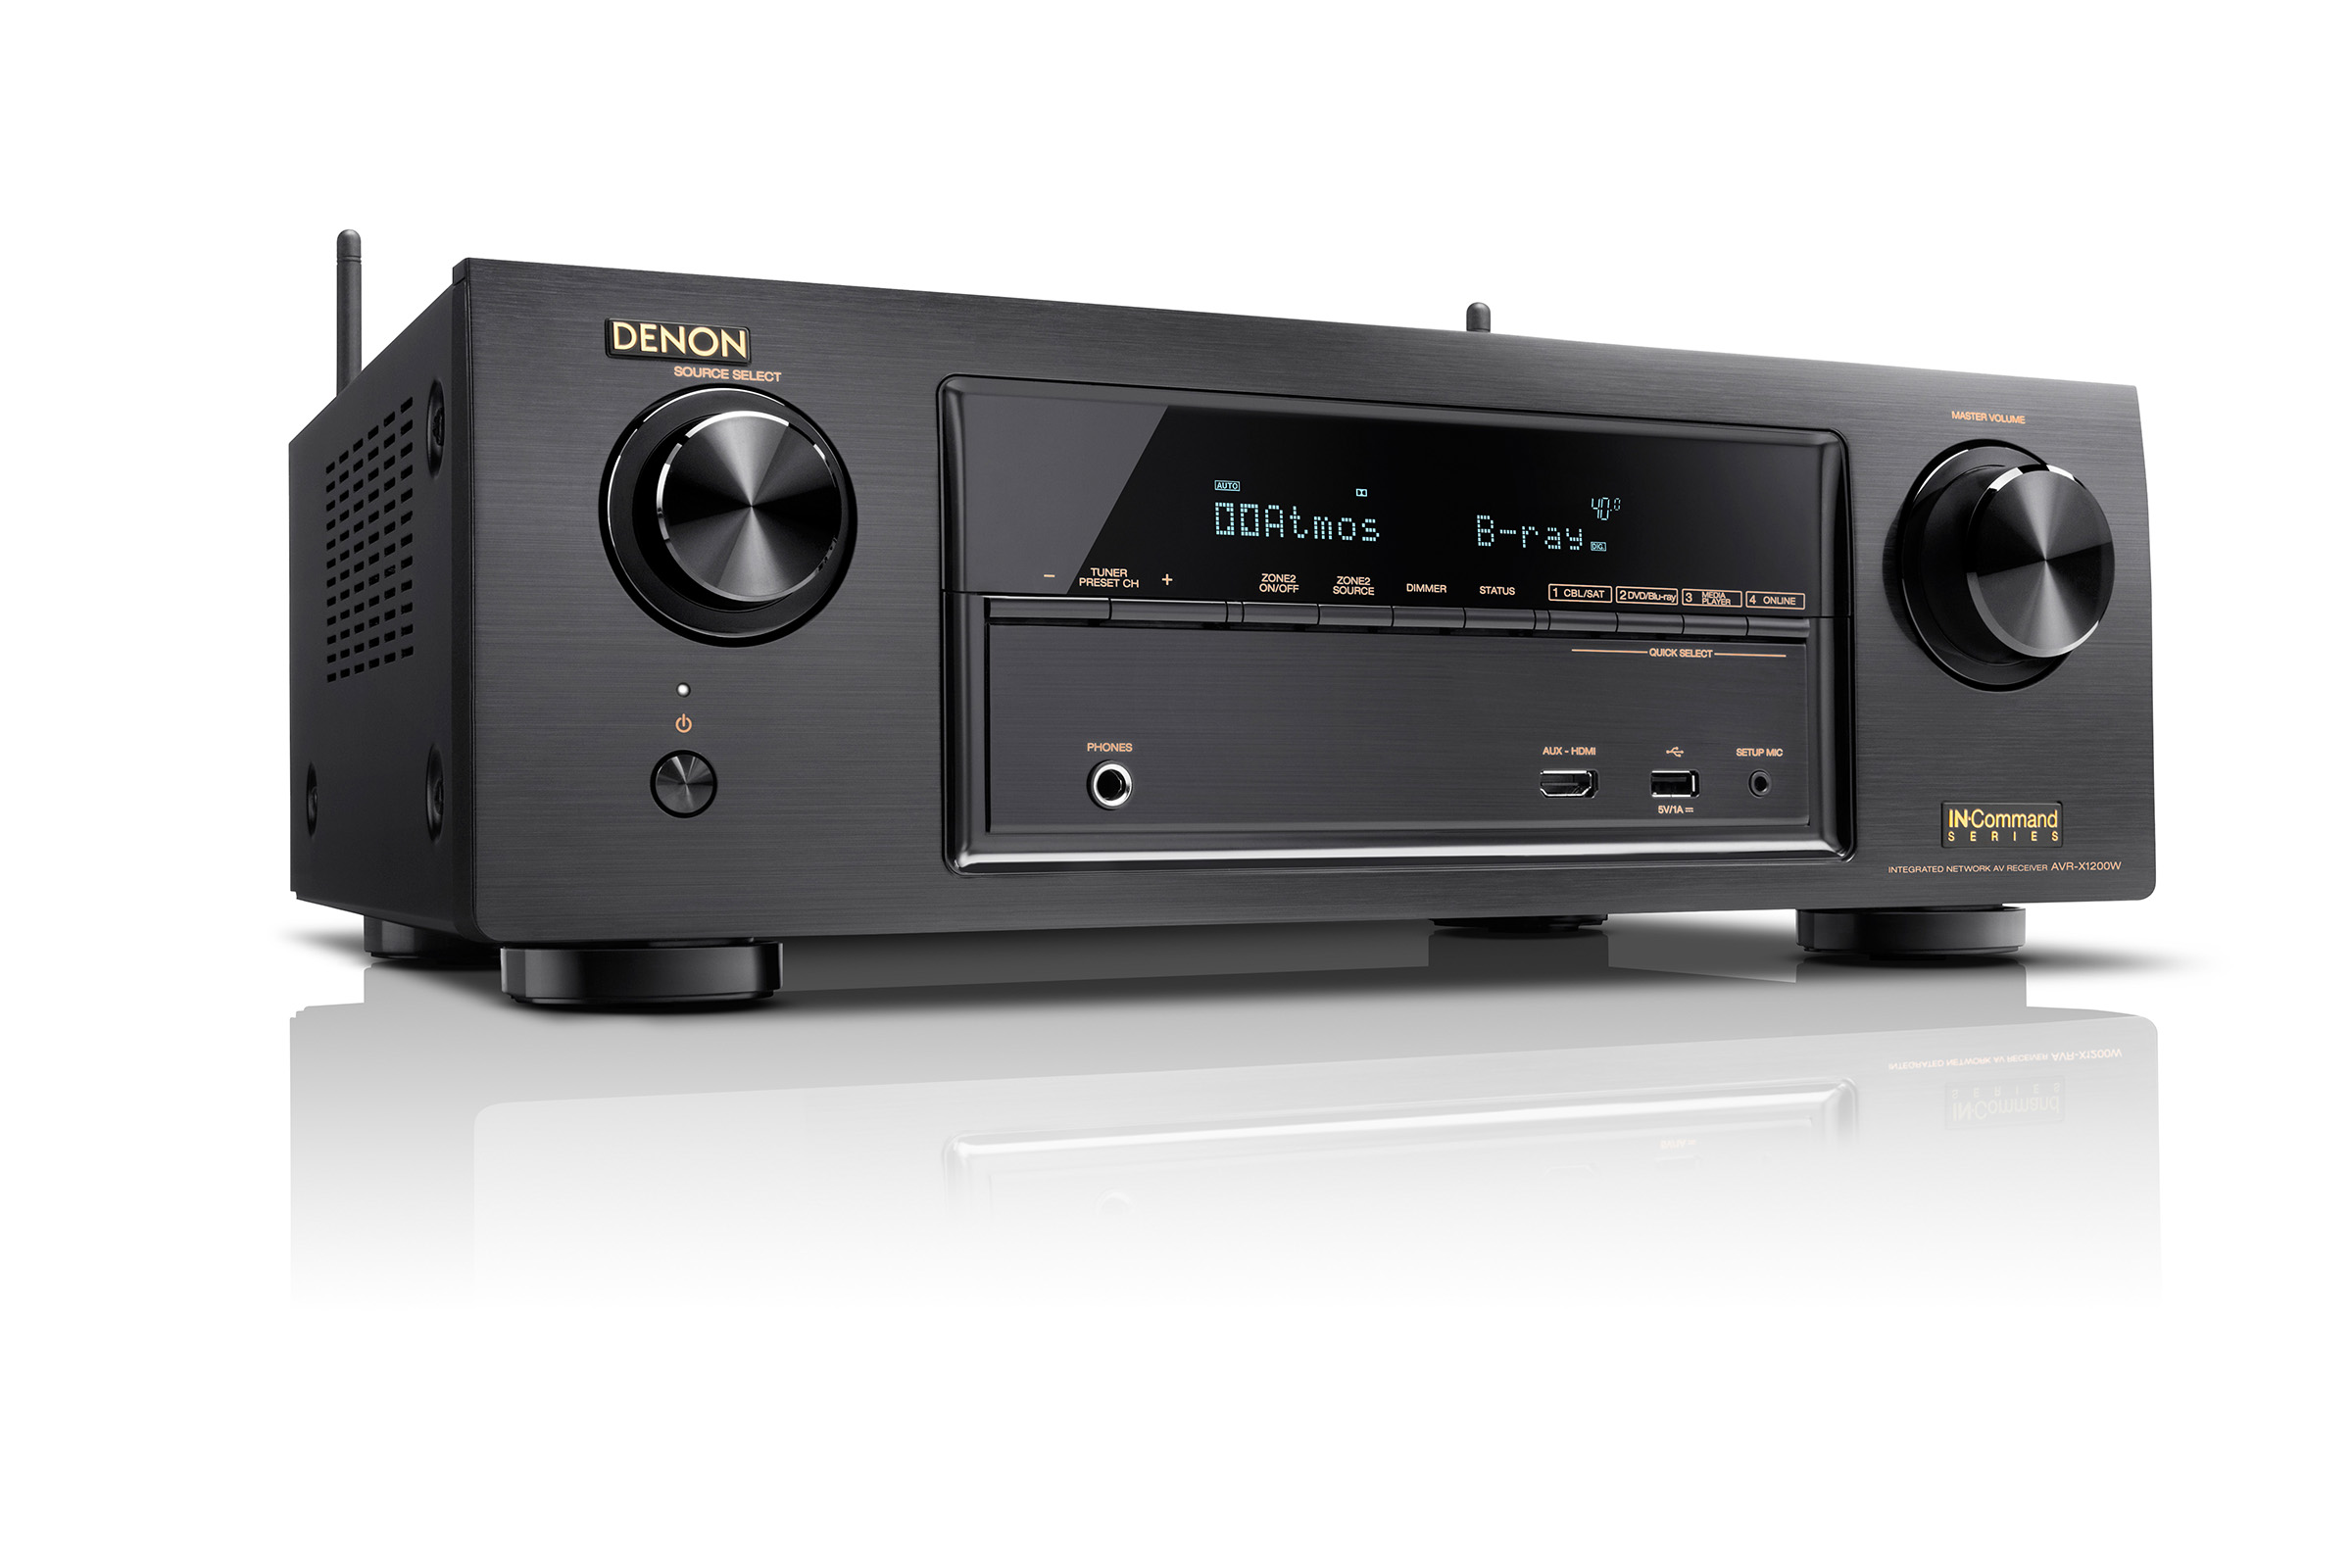 New IN-Command Series Receivers from Denon